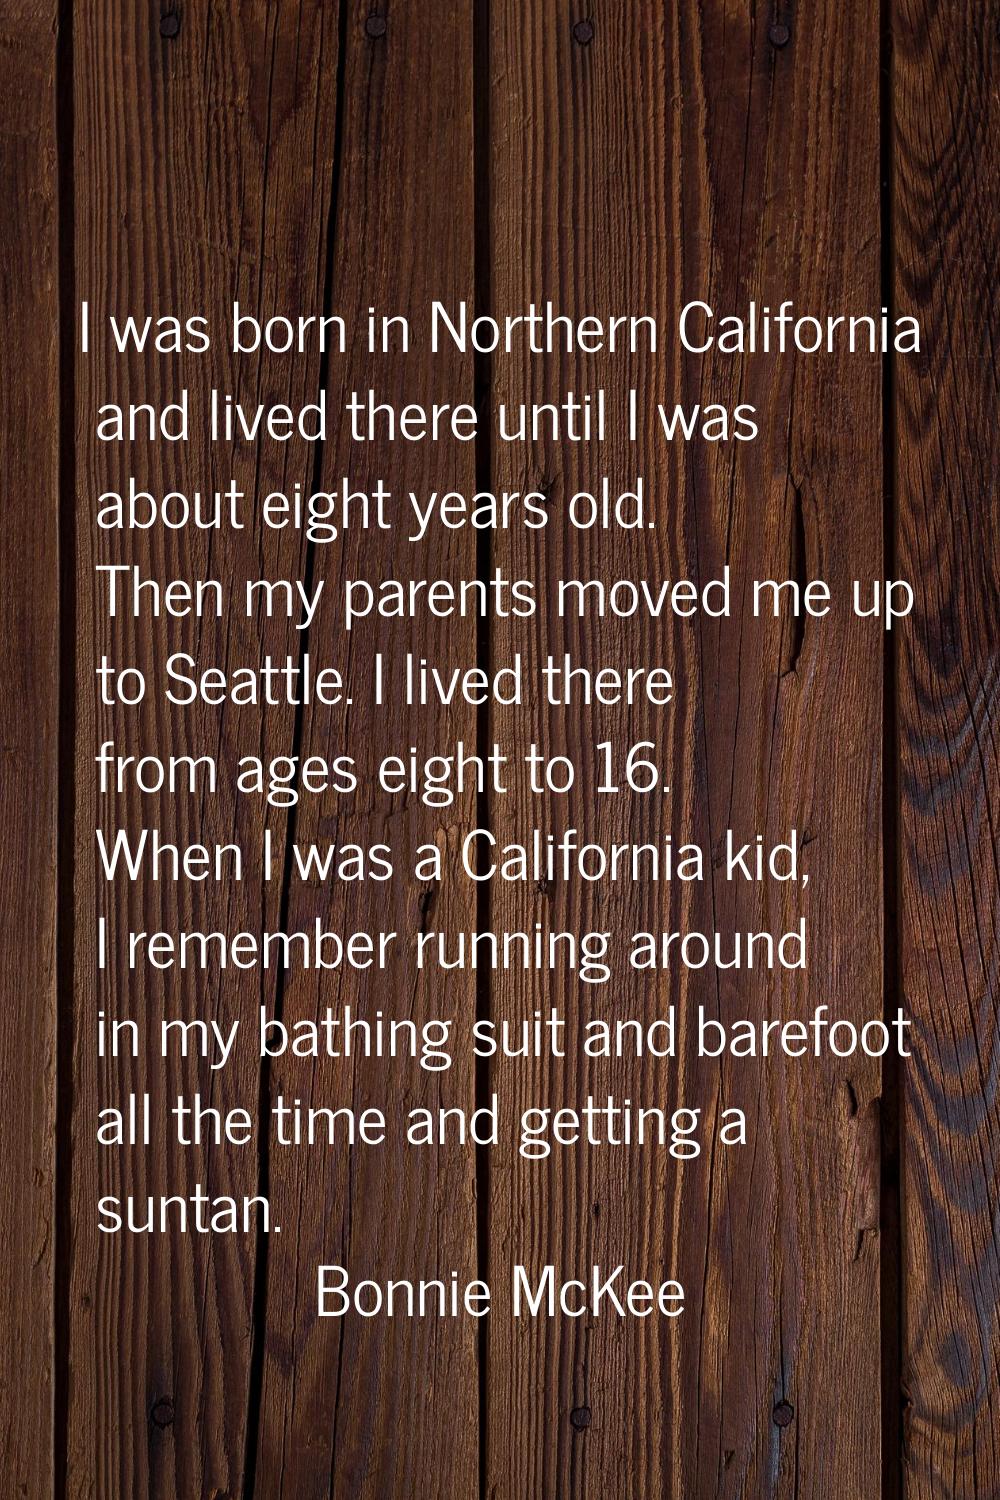 I was born in Northern California and lived there until I was about eight years old. Then my parent